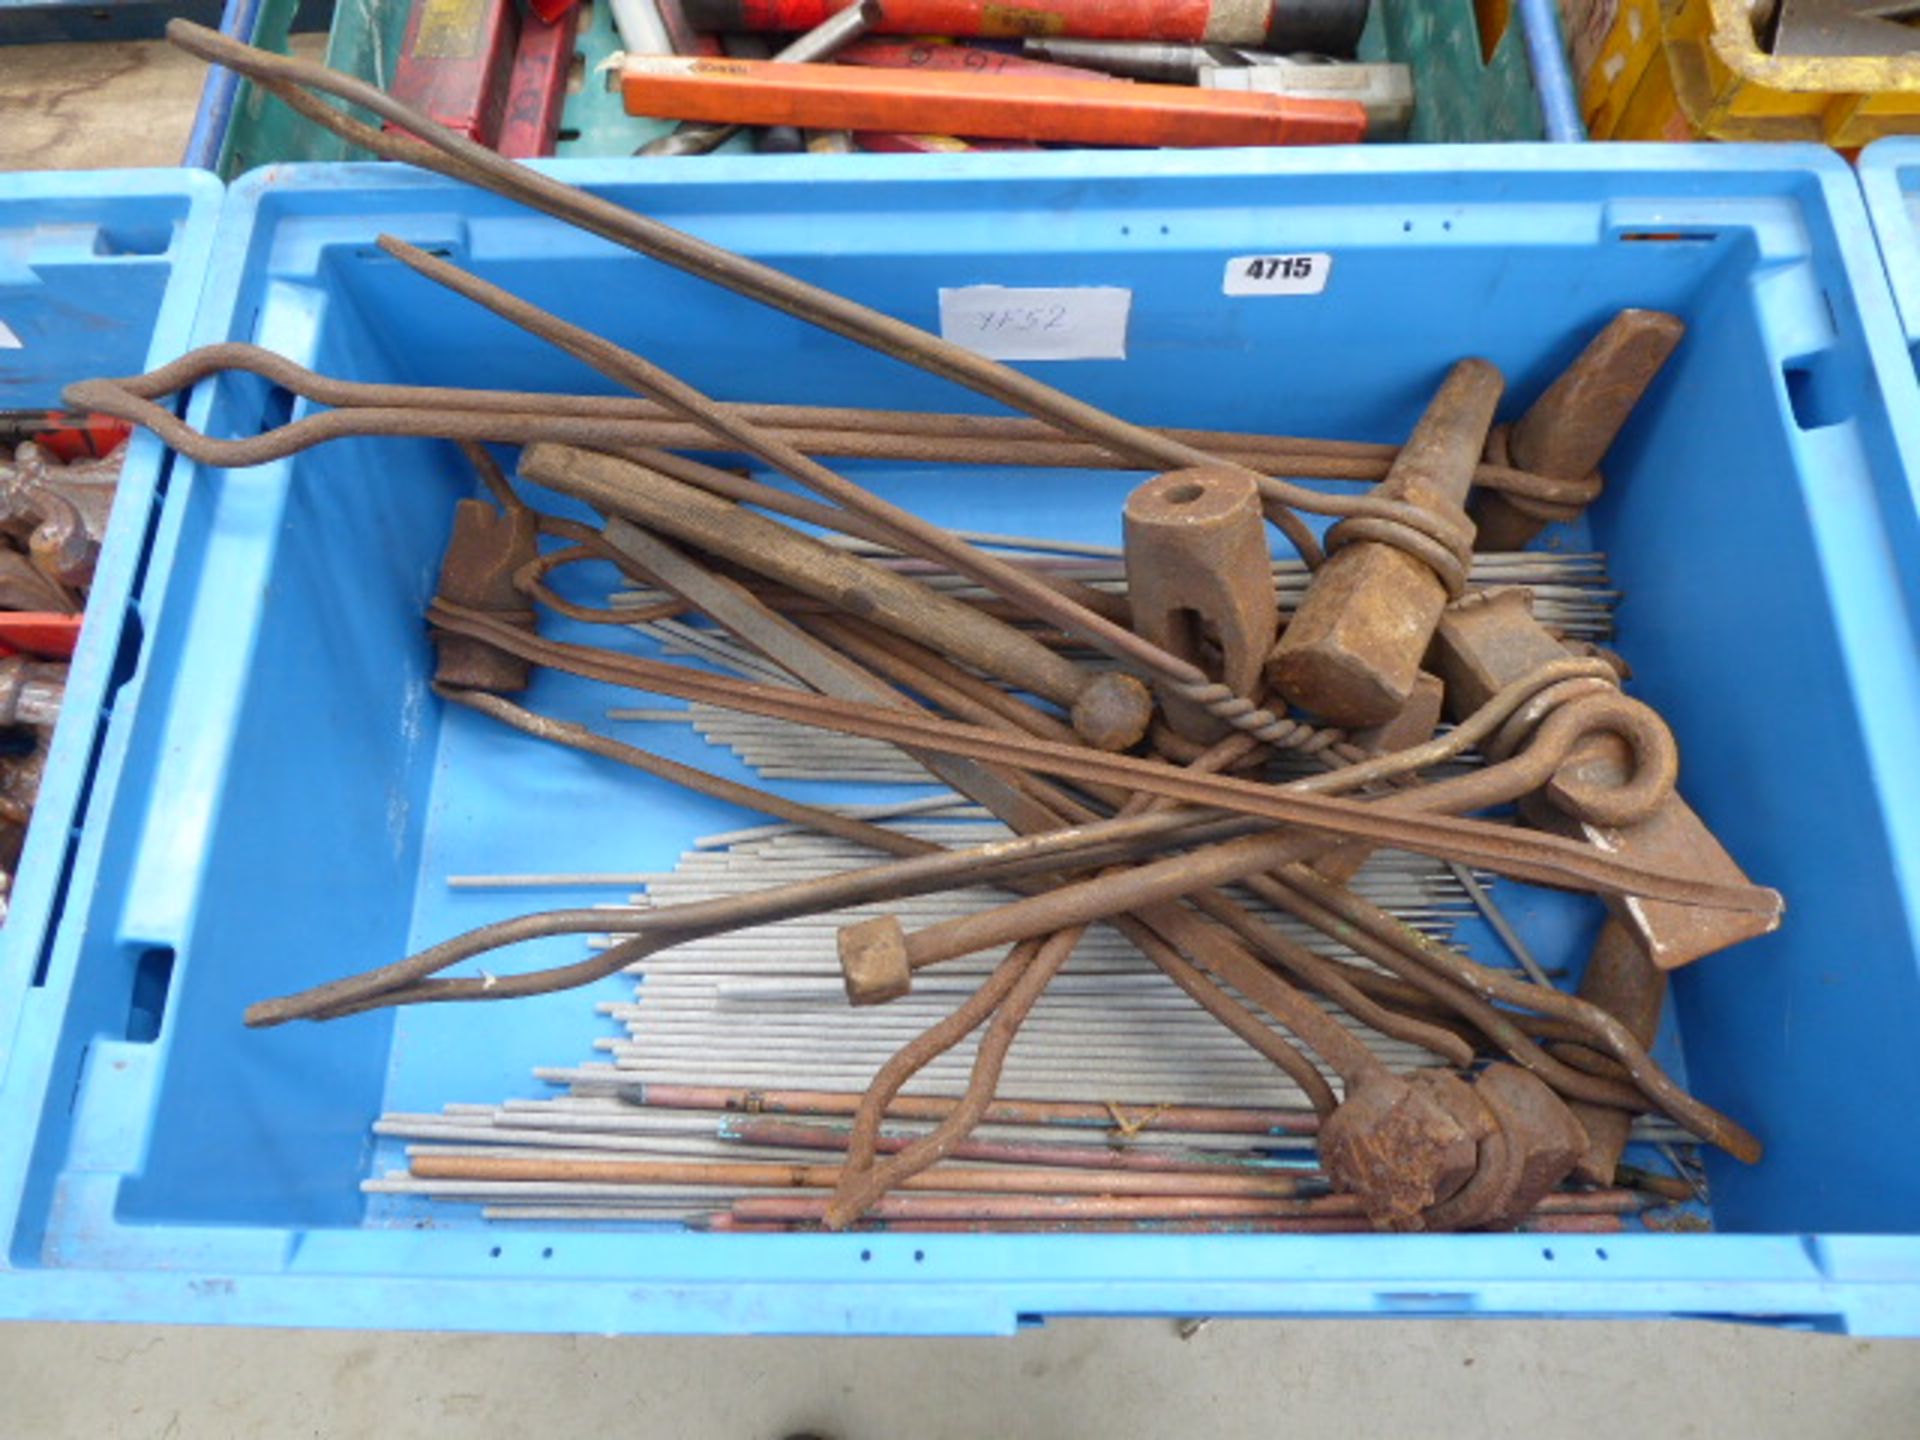 Box containing a quantity of welding rods and welding tools